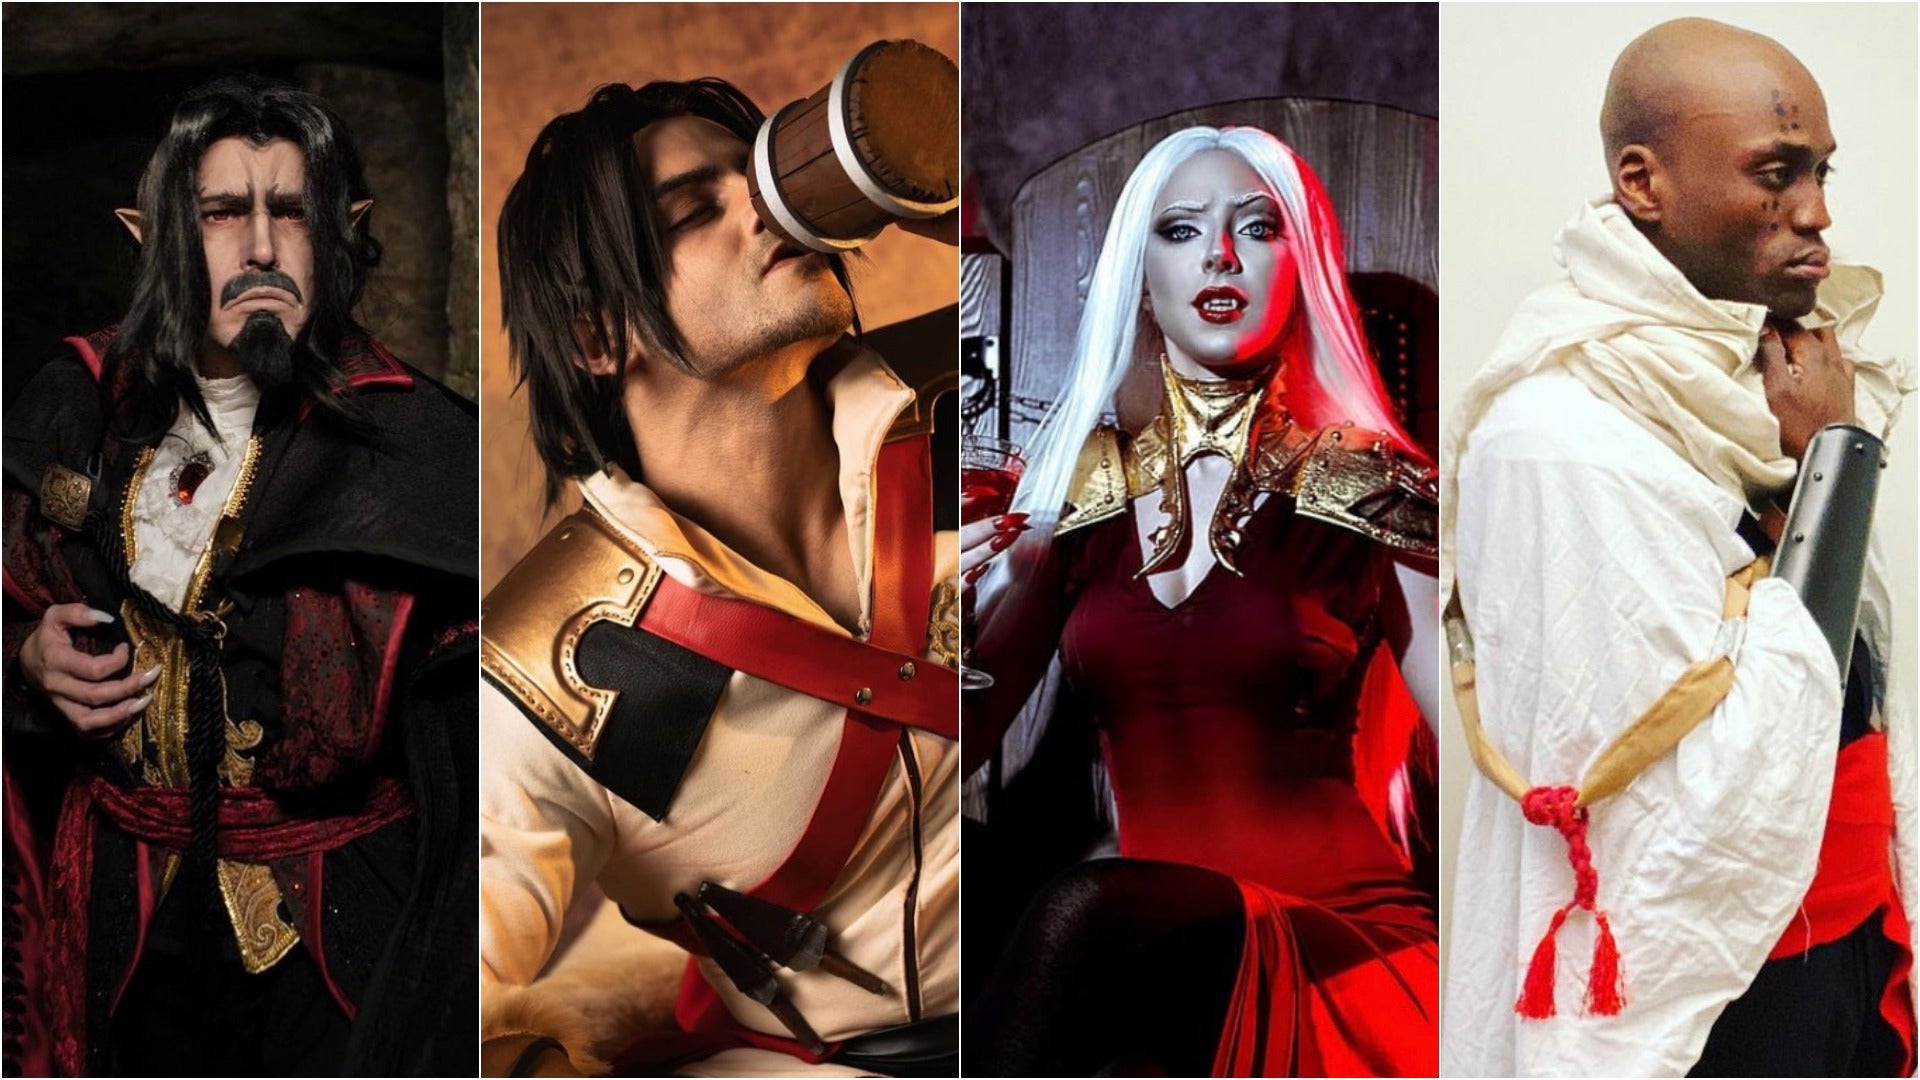 Mustache puff Neuropathy 11 Castlevania Cosplayers Who Bring The Characters To Life | Cosplay Central